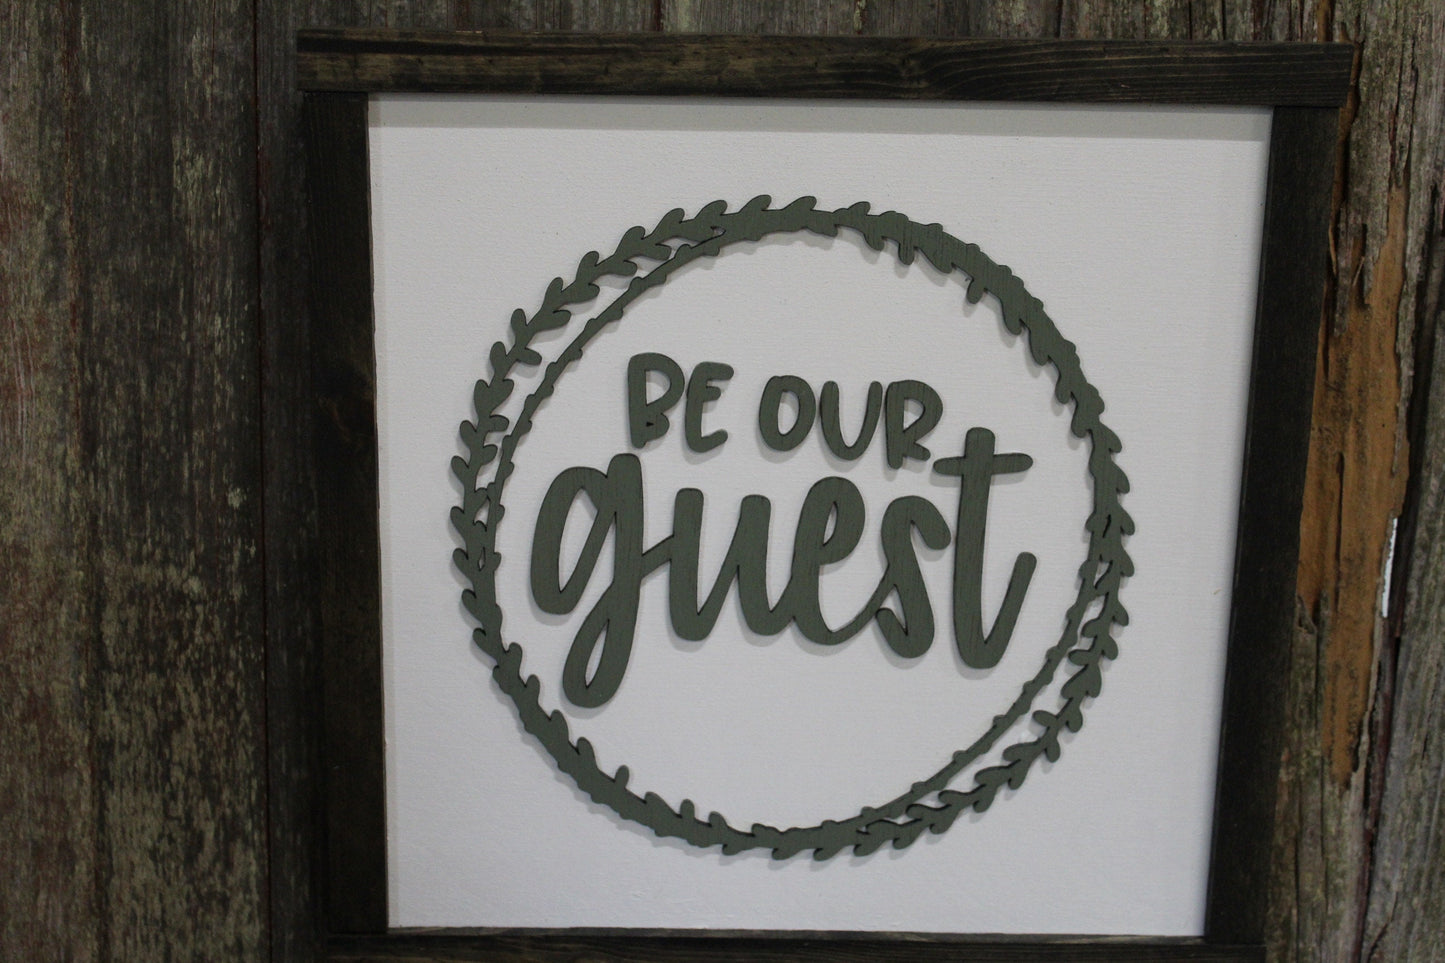 Be Our Guest Wood Sign 3D Raised Text Script Laurel Wreath Country Primitive Framed Wall Hanging Decoration Porch Decor Black White Green